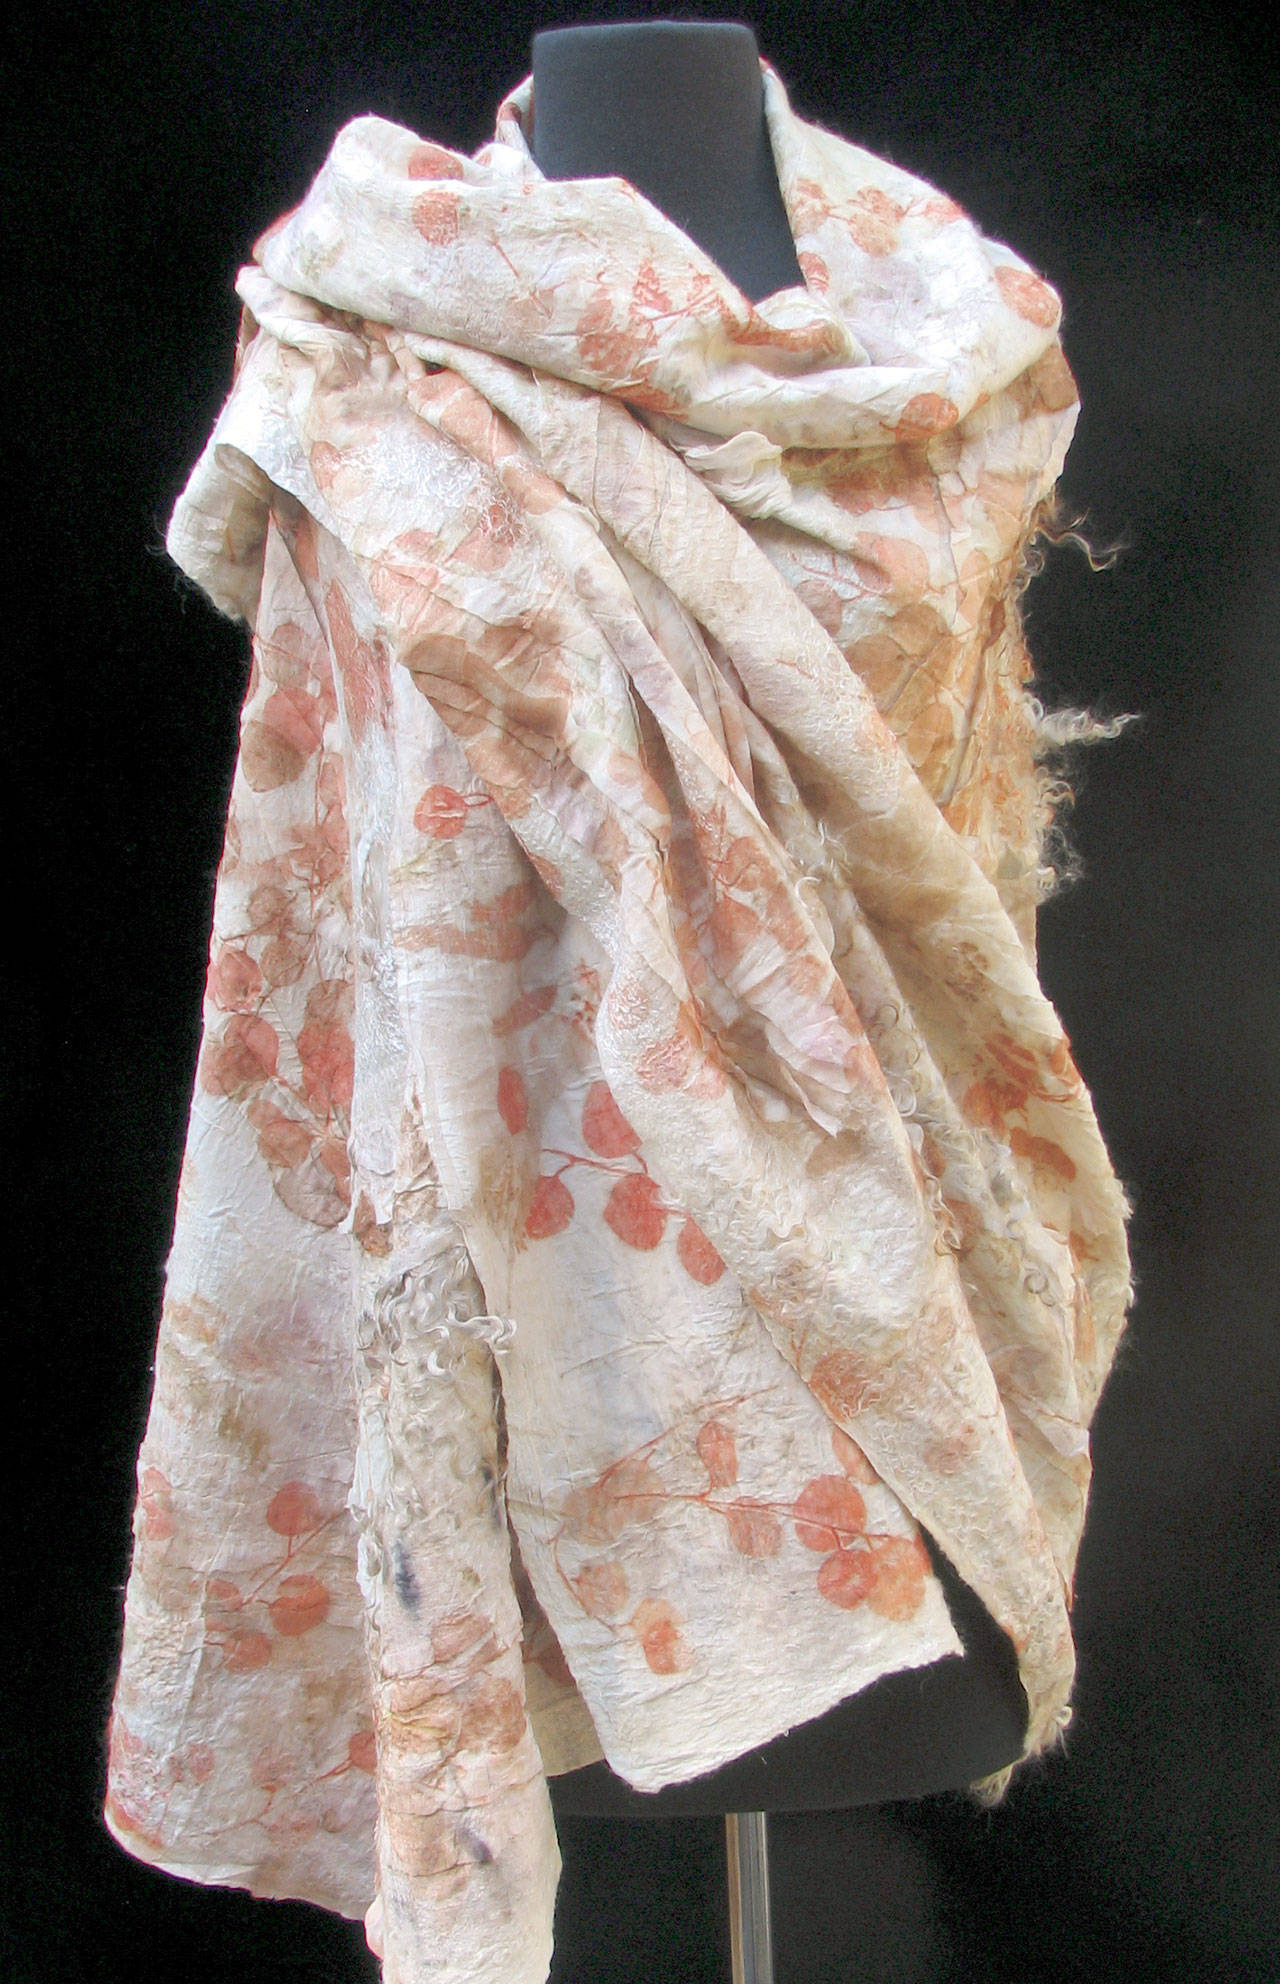 Michelle Johnson creates felted garments. This piece, a shawl entitled “Plant Dance,” has been created from various breeds of wool combined with silk using the nuno-felting process. It’s eco-printed with varieties of local fresh leaves and branches. Johnson says the materials were carefully gathered with the hopes of having the plants’ energy embrace the wearer.